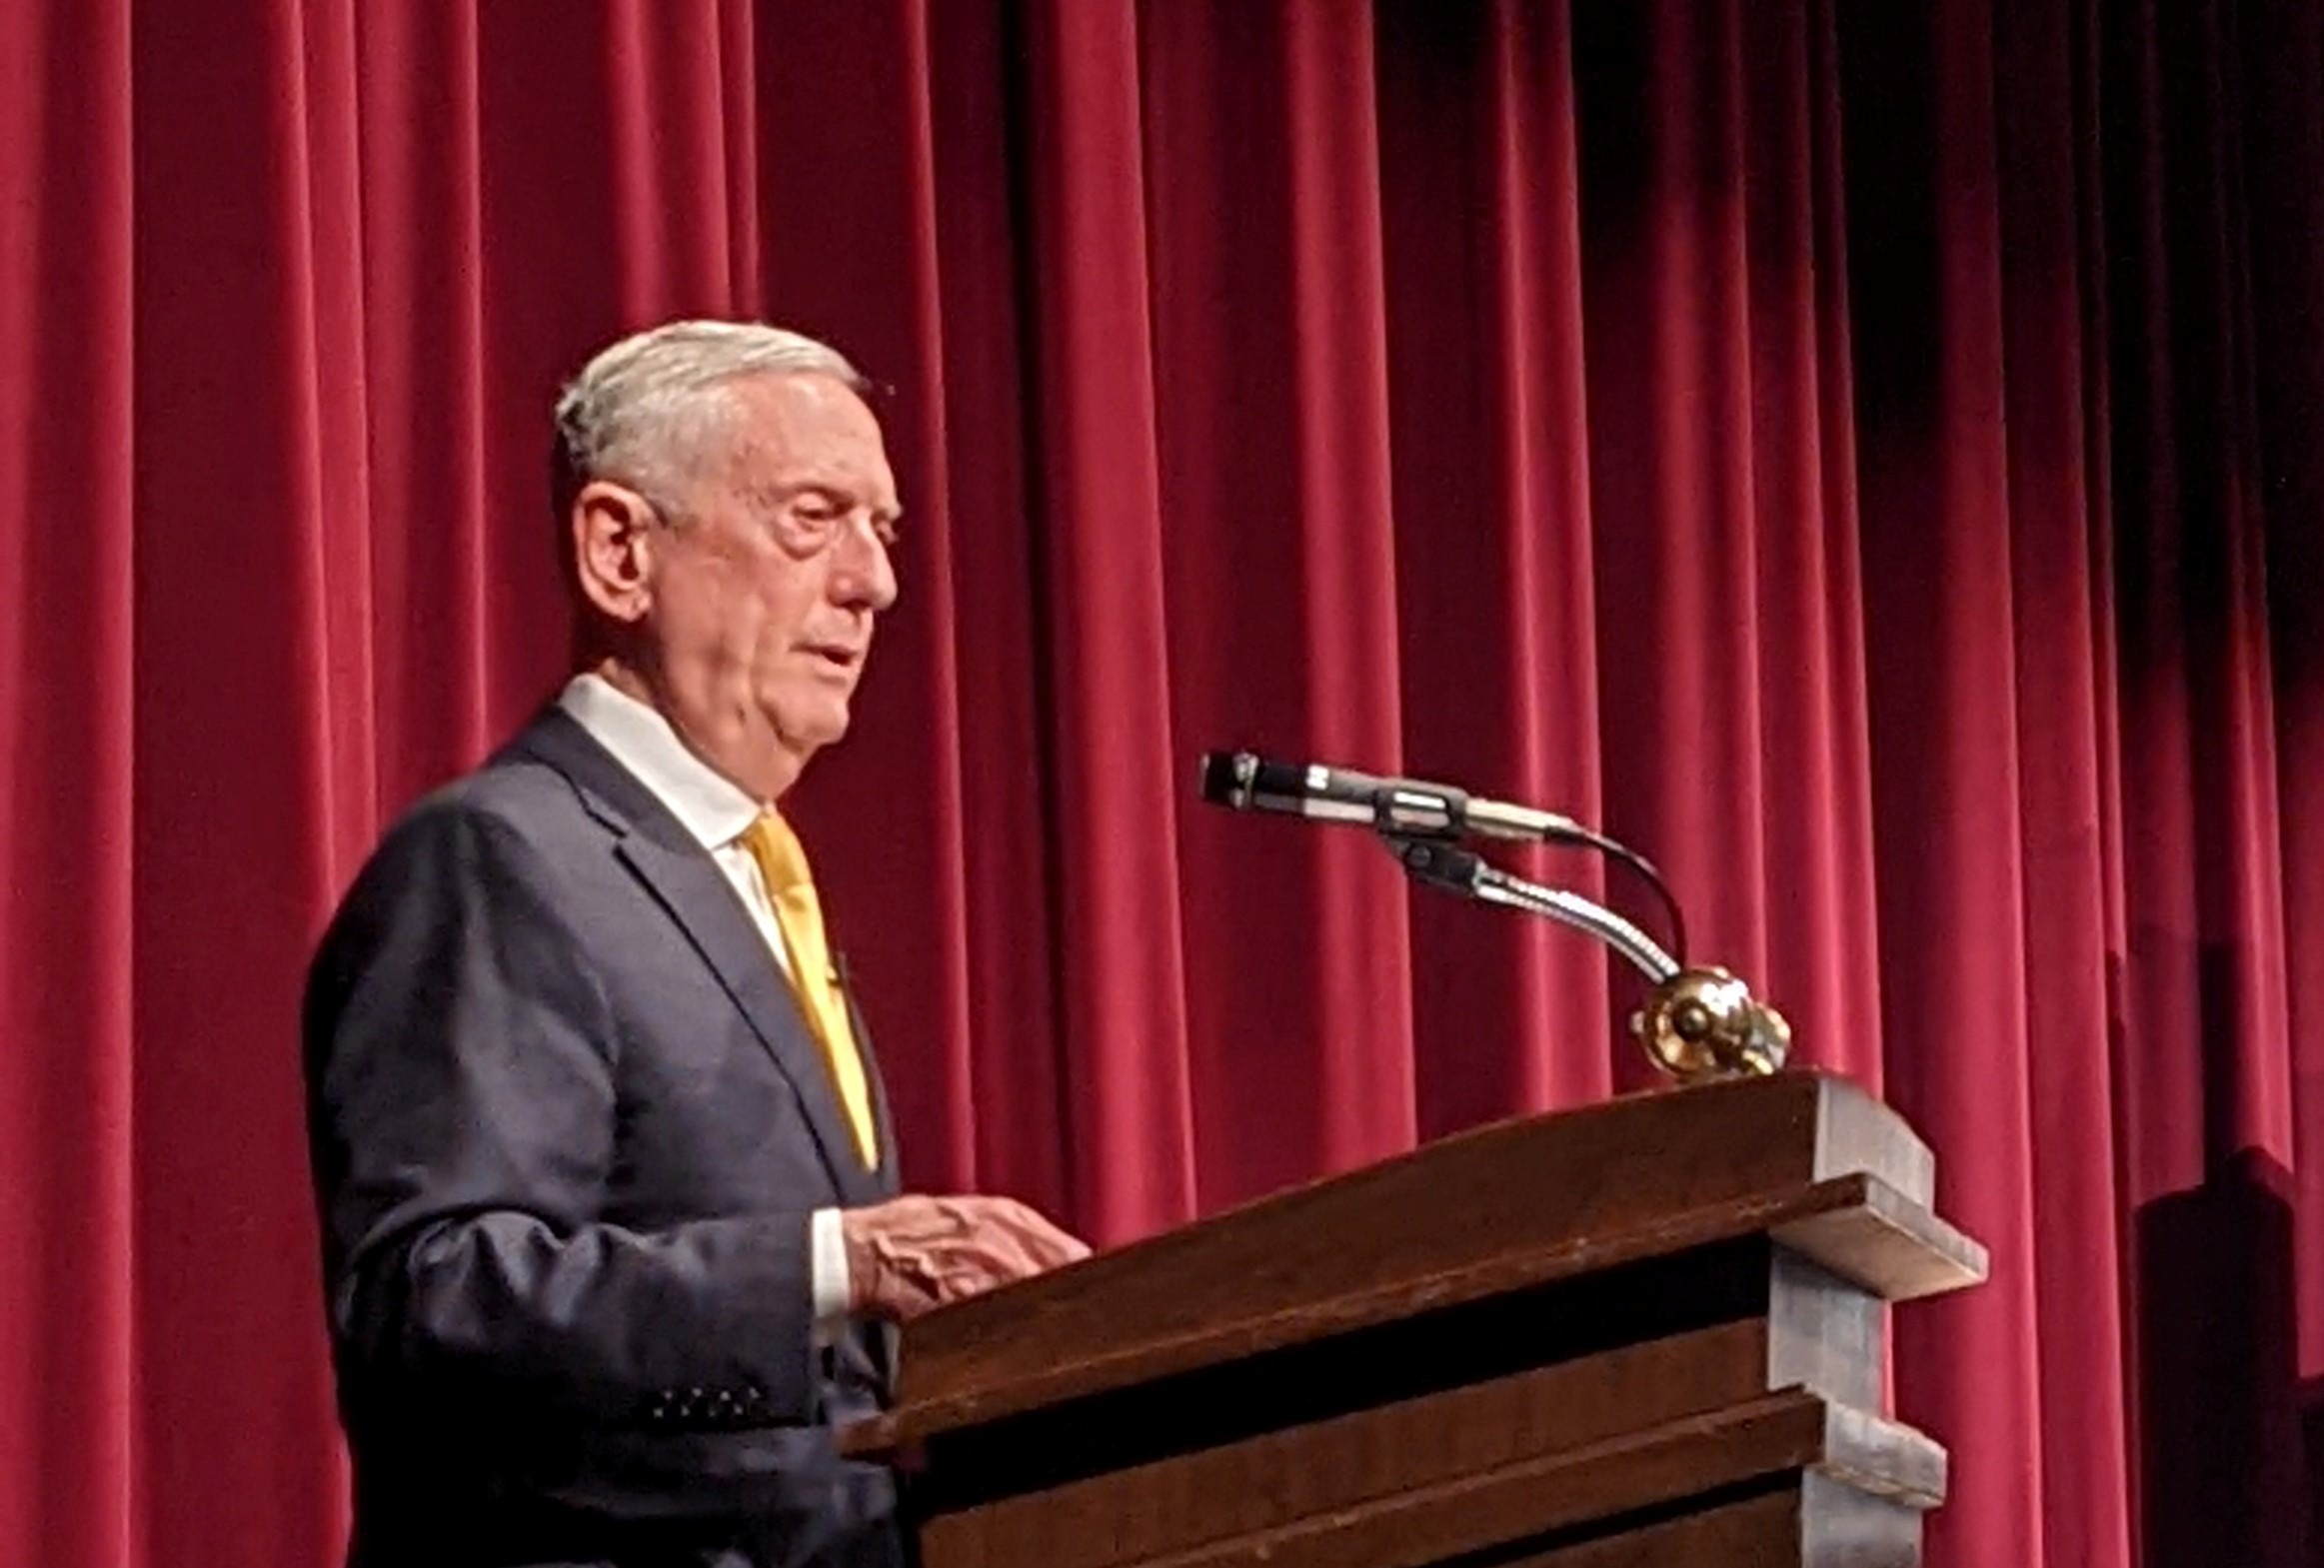 James Mattis stands at a wood podium in front of a red curtain.